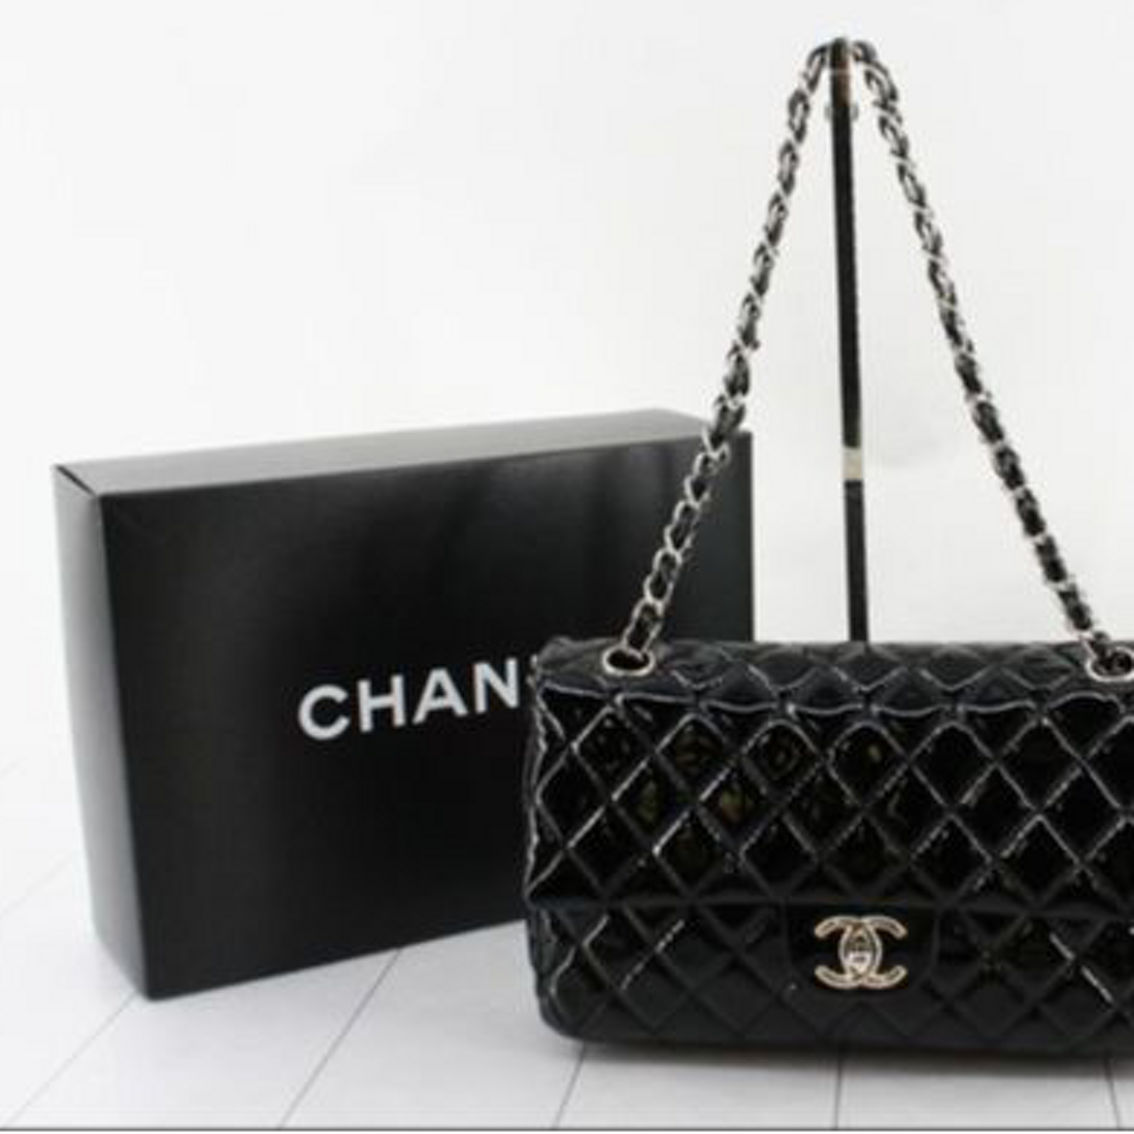 Chanel Black Patent Calf Quilted Calf Leather Medium Classic Double Flap Handbag - Image 1 of 5